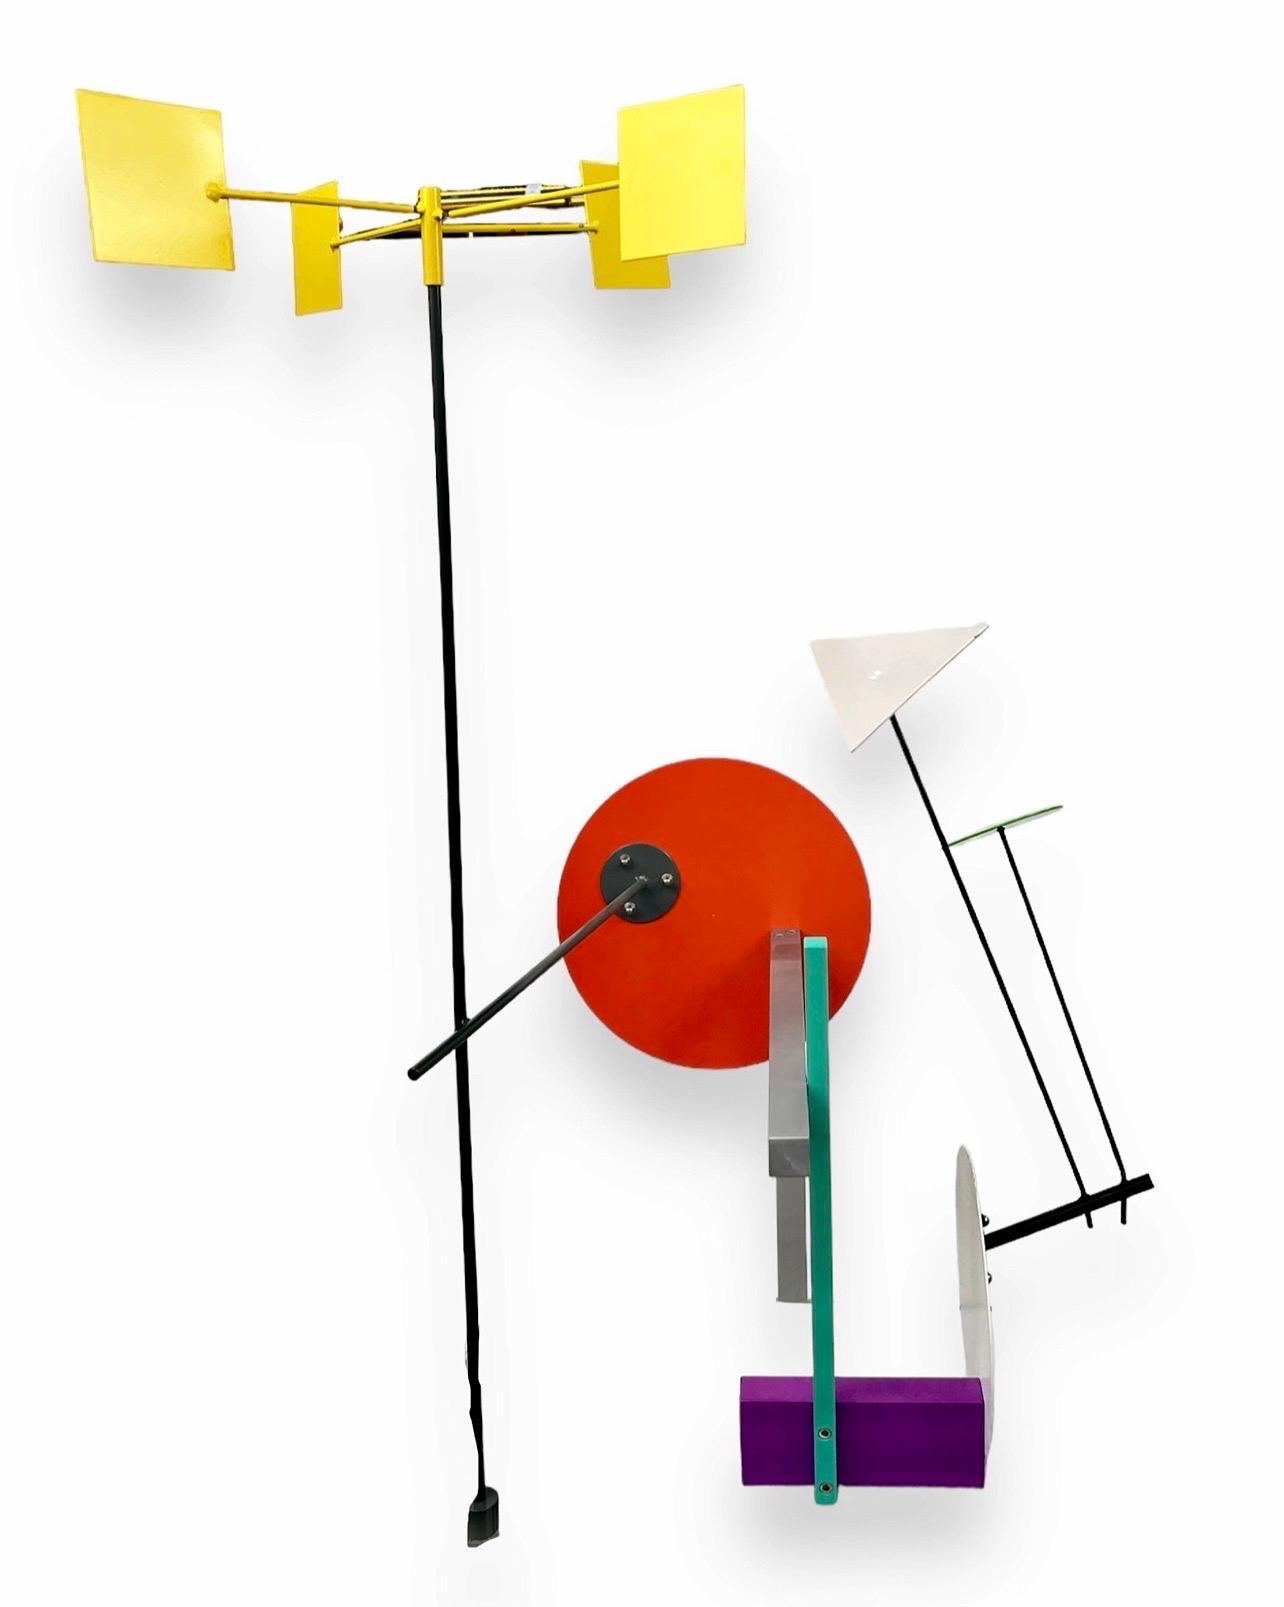 Peter Shire
Night Studio, 1989 
Welded steel and aluminum metal sculpture with anodizing and two-part polyester painting, 
Movable kinetic Elements: yellow vane
27 1/4" tall, 18" wide, and 15" deep.
Edition of 24 (not sure if they were all produced,